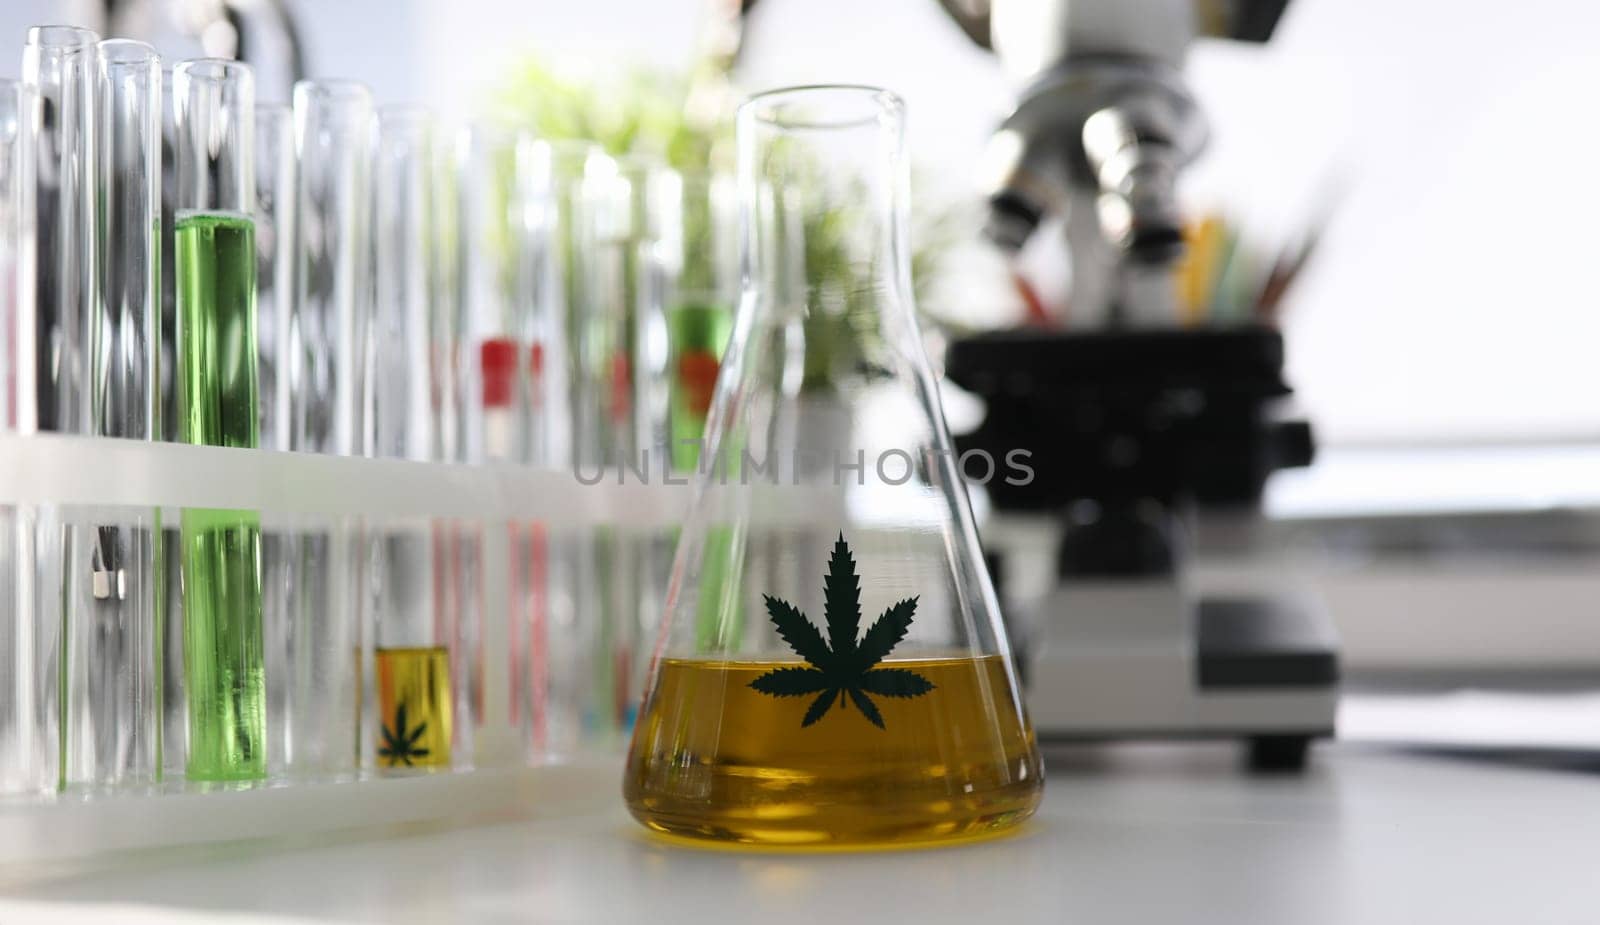 In chemical laboratory on table is flask hemp oil. Cannabis oil extraction in laboratory. Medical hemp. Cannabis analysis in laboratory. Hemp innovations to solve environmental problems